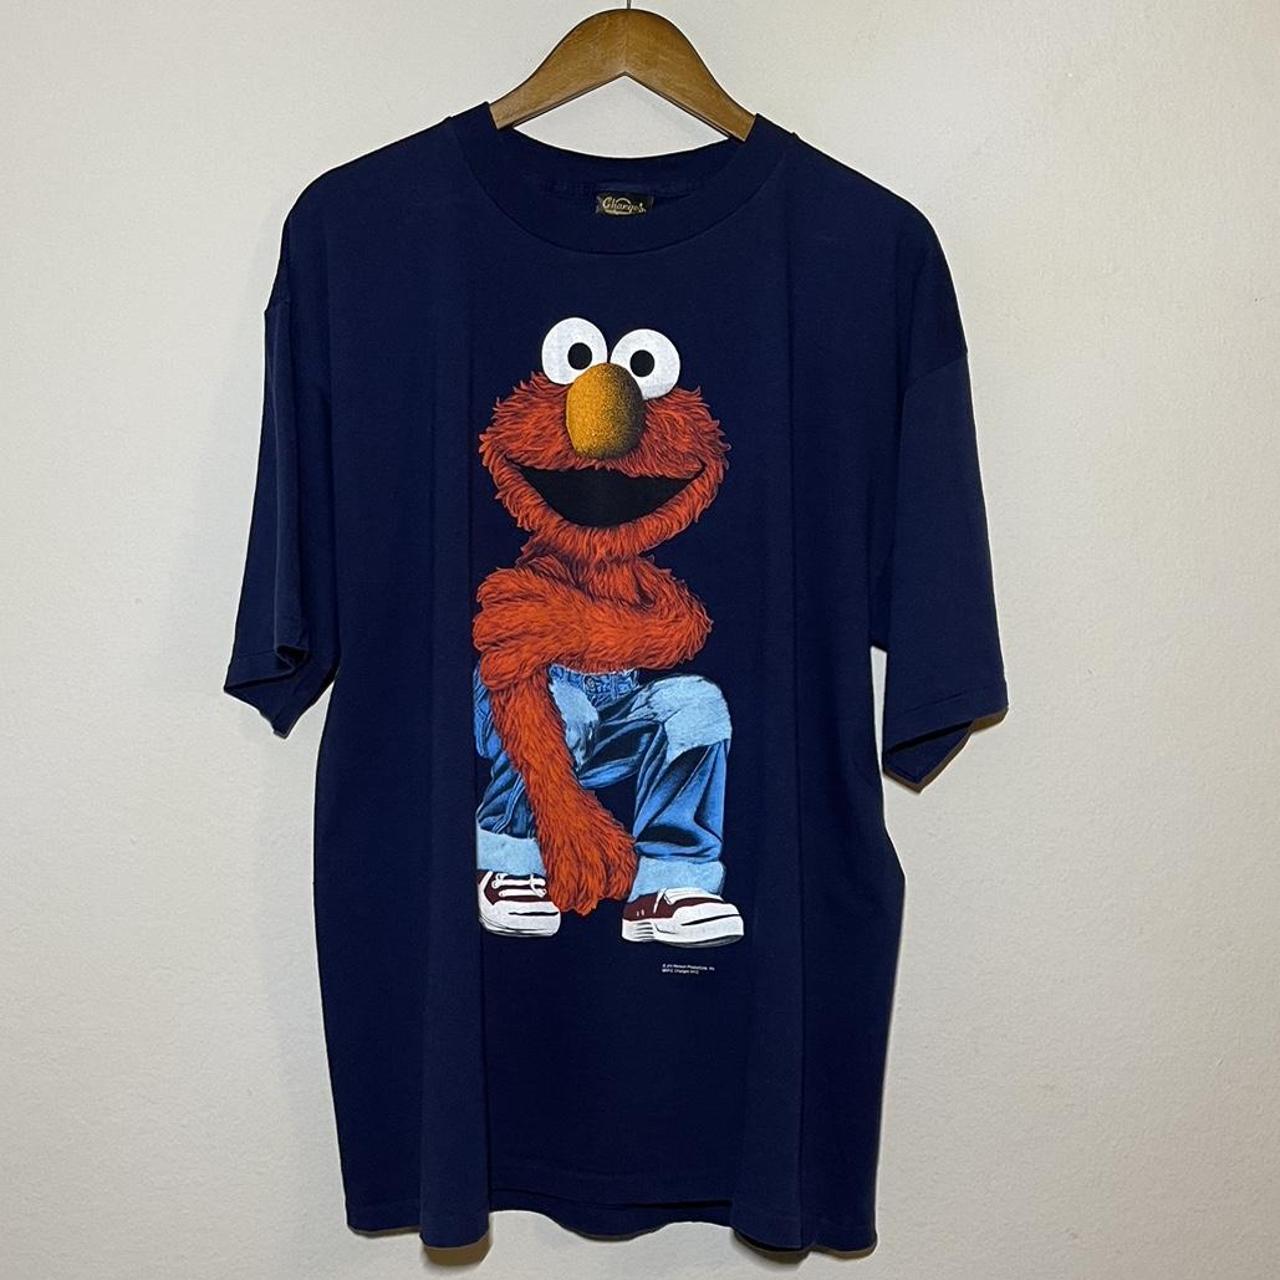 Henson Men's Navy and Red T-shirt